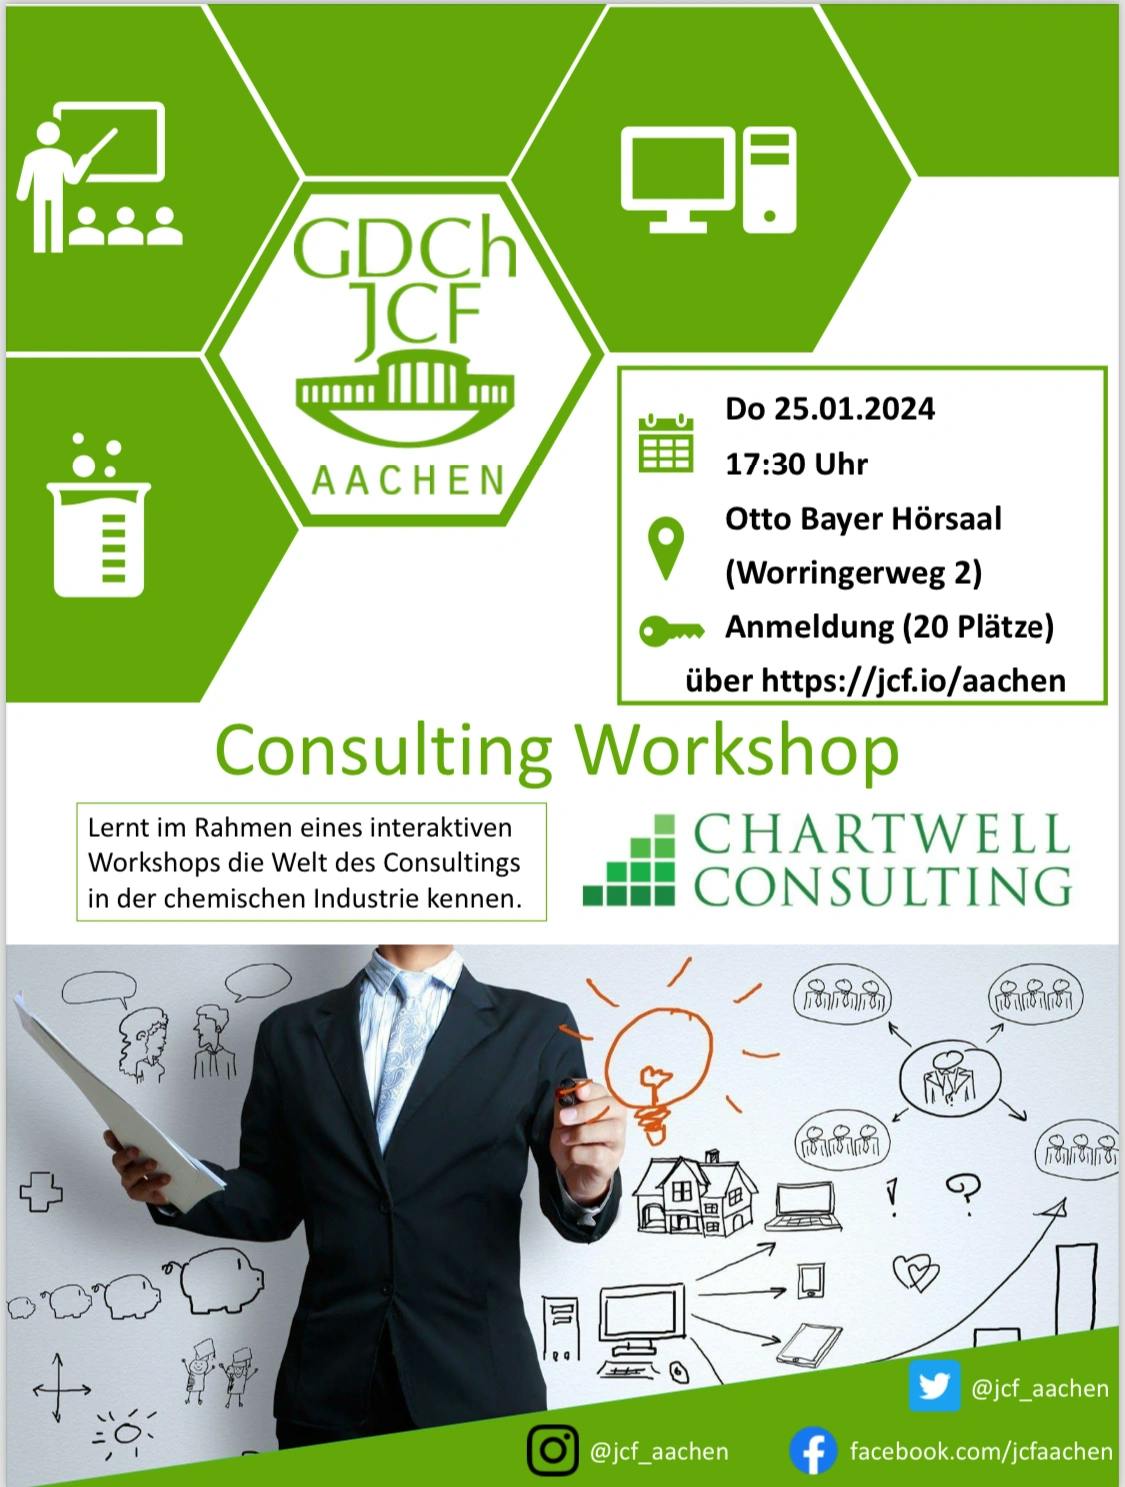 Consulting Workshop